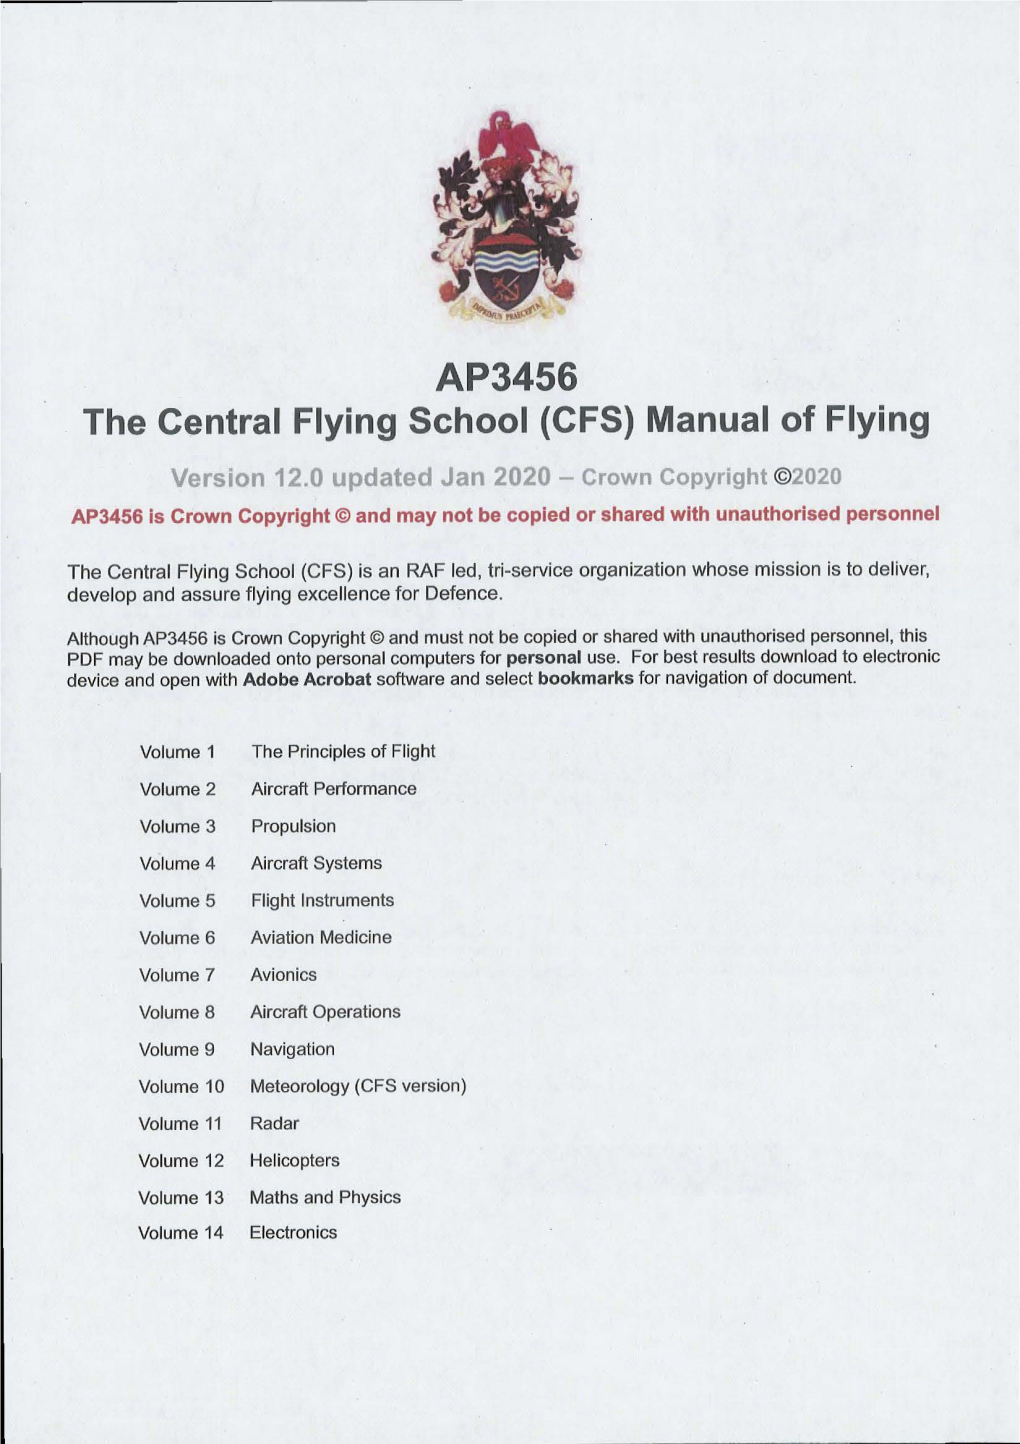 AP3456 the Central Flying School (CFS) Manual of Flying